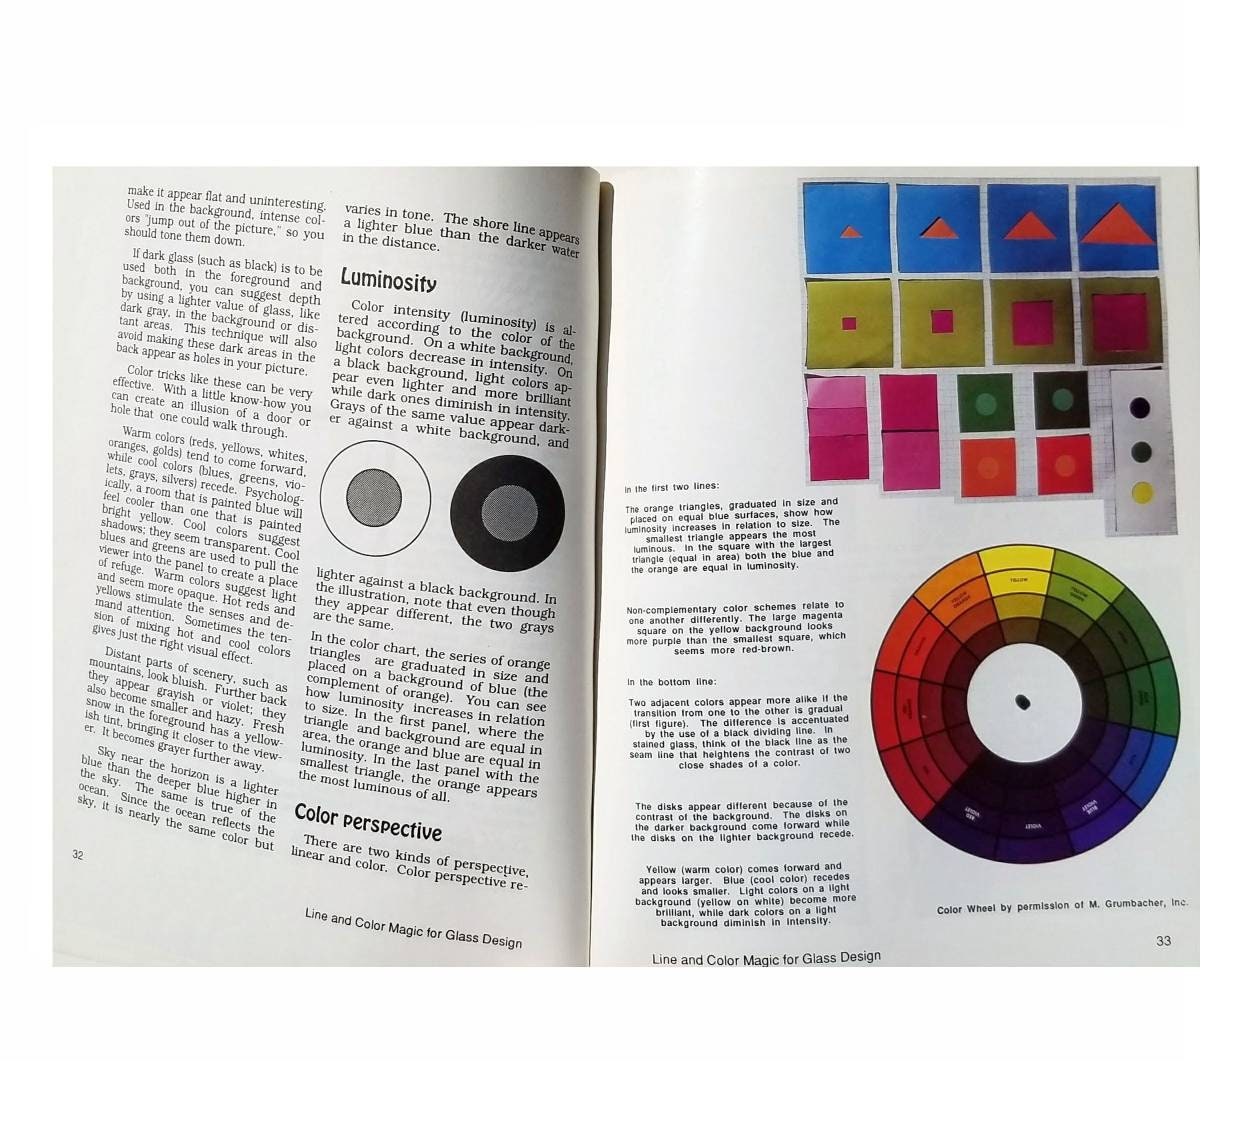 Stained Glass Guide Book. How to Select Color for your Art Projects. Vintage Used Condition, from an old Glass Studio Library in St. Louis.